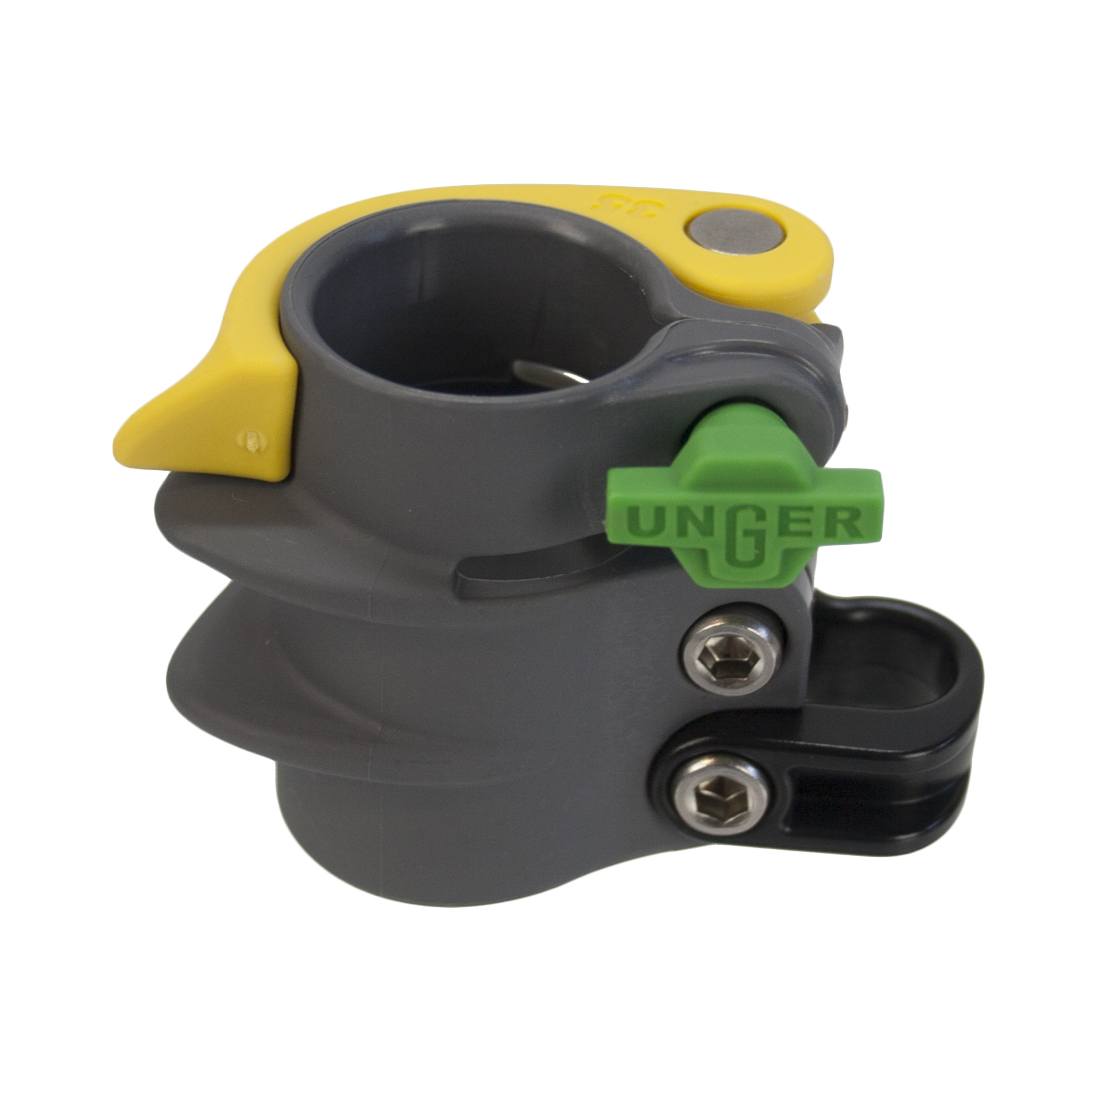 Unger-nLite-Replacement-Clamp-Yellow-Lever-Top-View